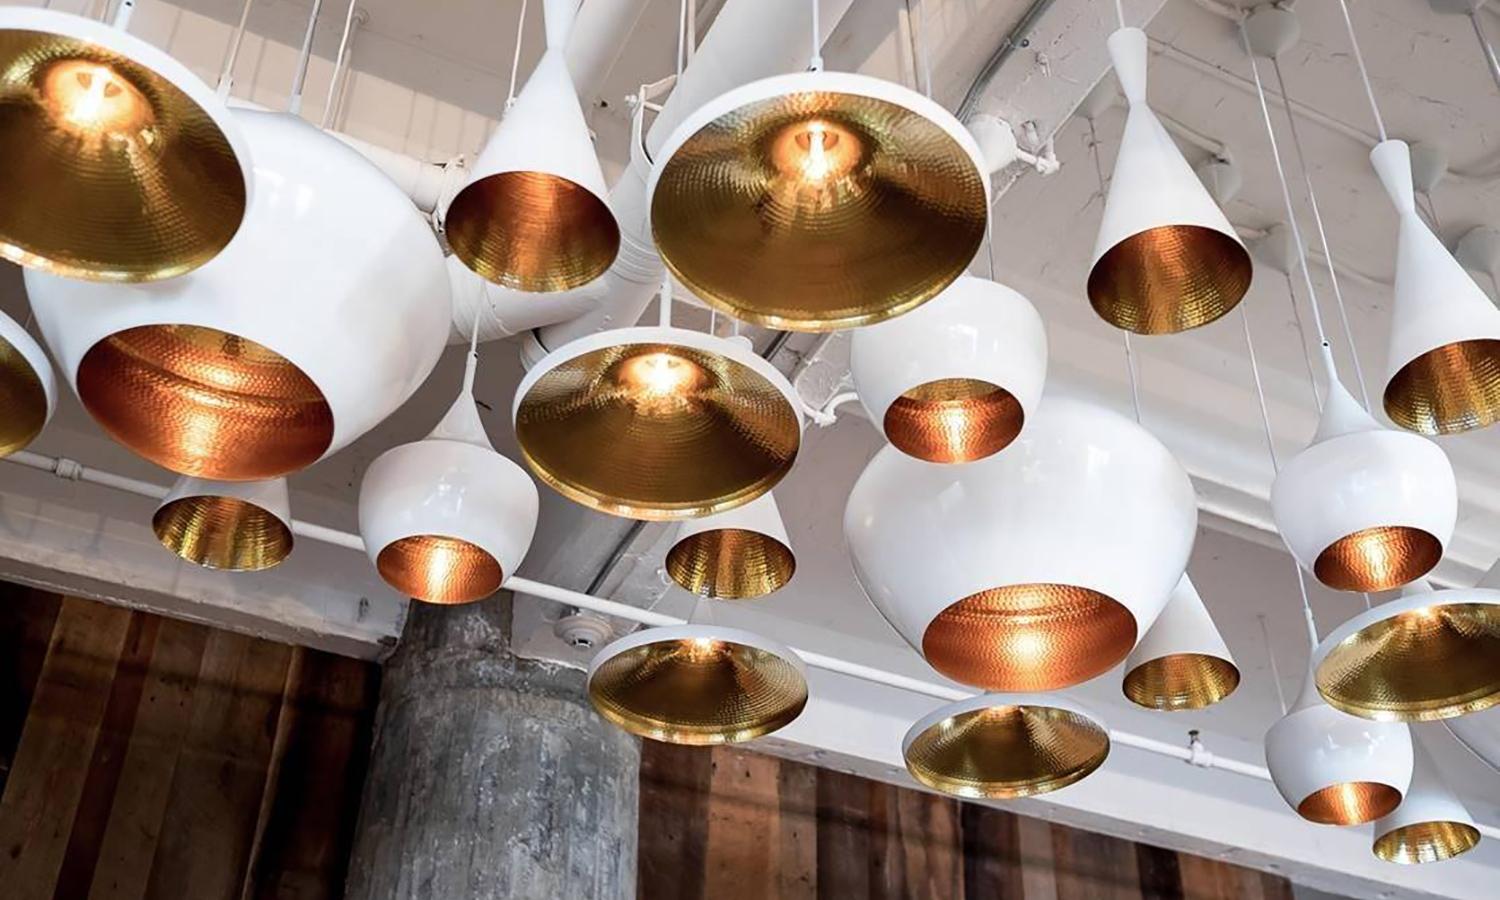 Minimal Tom Dixon Beat tall white pendant brass light fixture, contemporary. Gorgeous piece. Retails for 550 USD. 
The Beat tall pendant by Tom Dixon brings the rustic, down-to-earth appeal of traditional Indian cooking pots and water vessels to